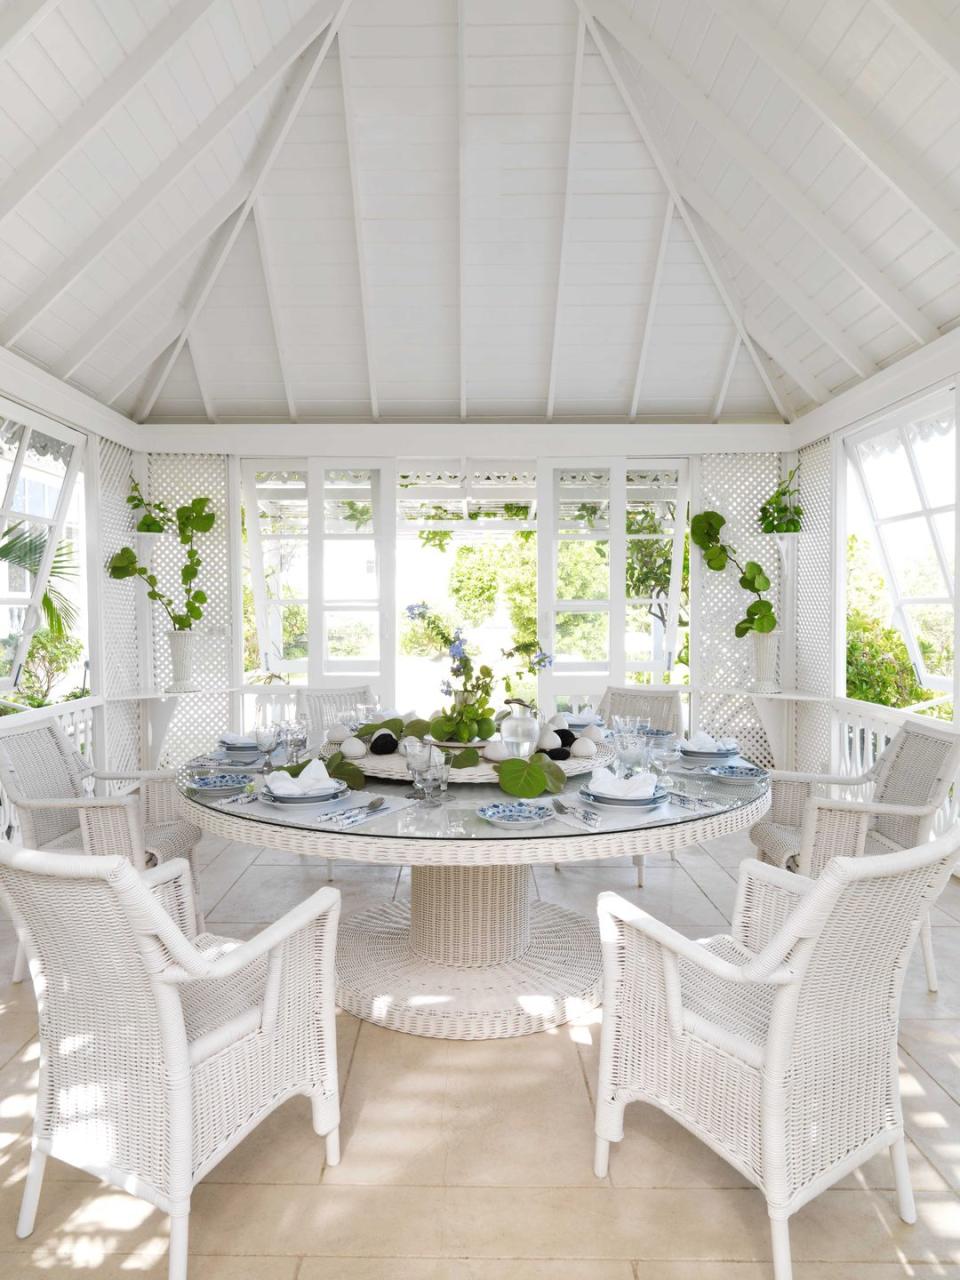 This Mustique Dining Pavillion Designed by Veere Greeney